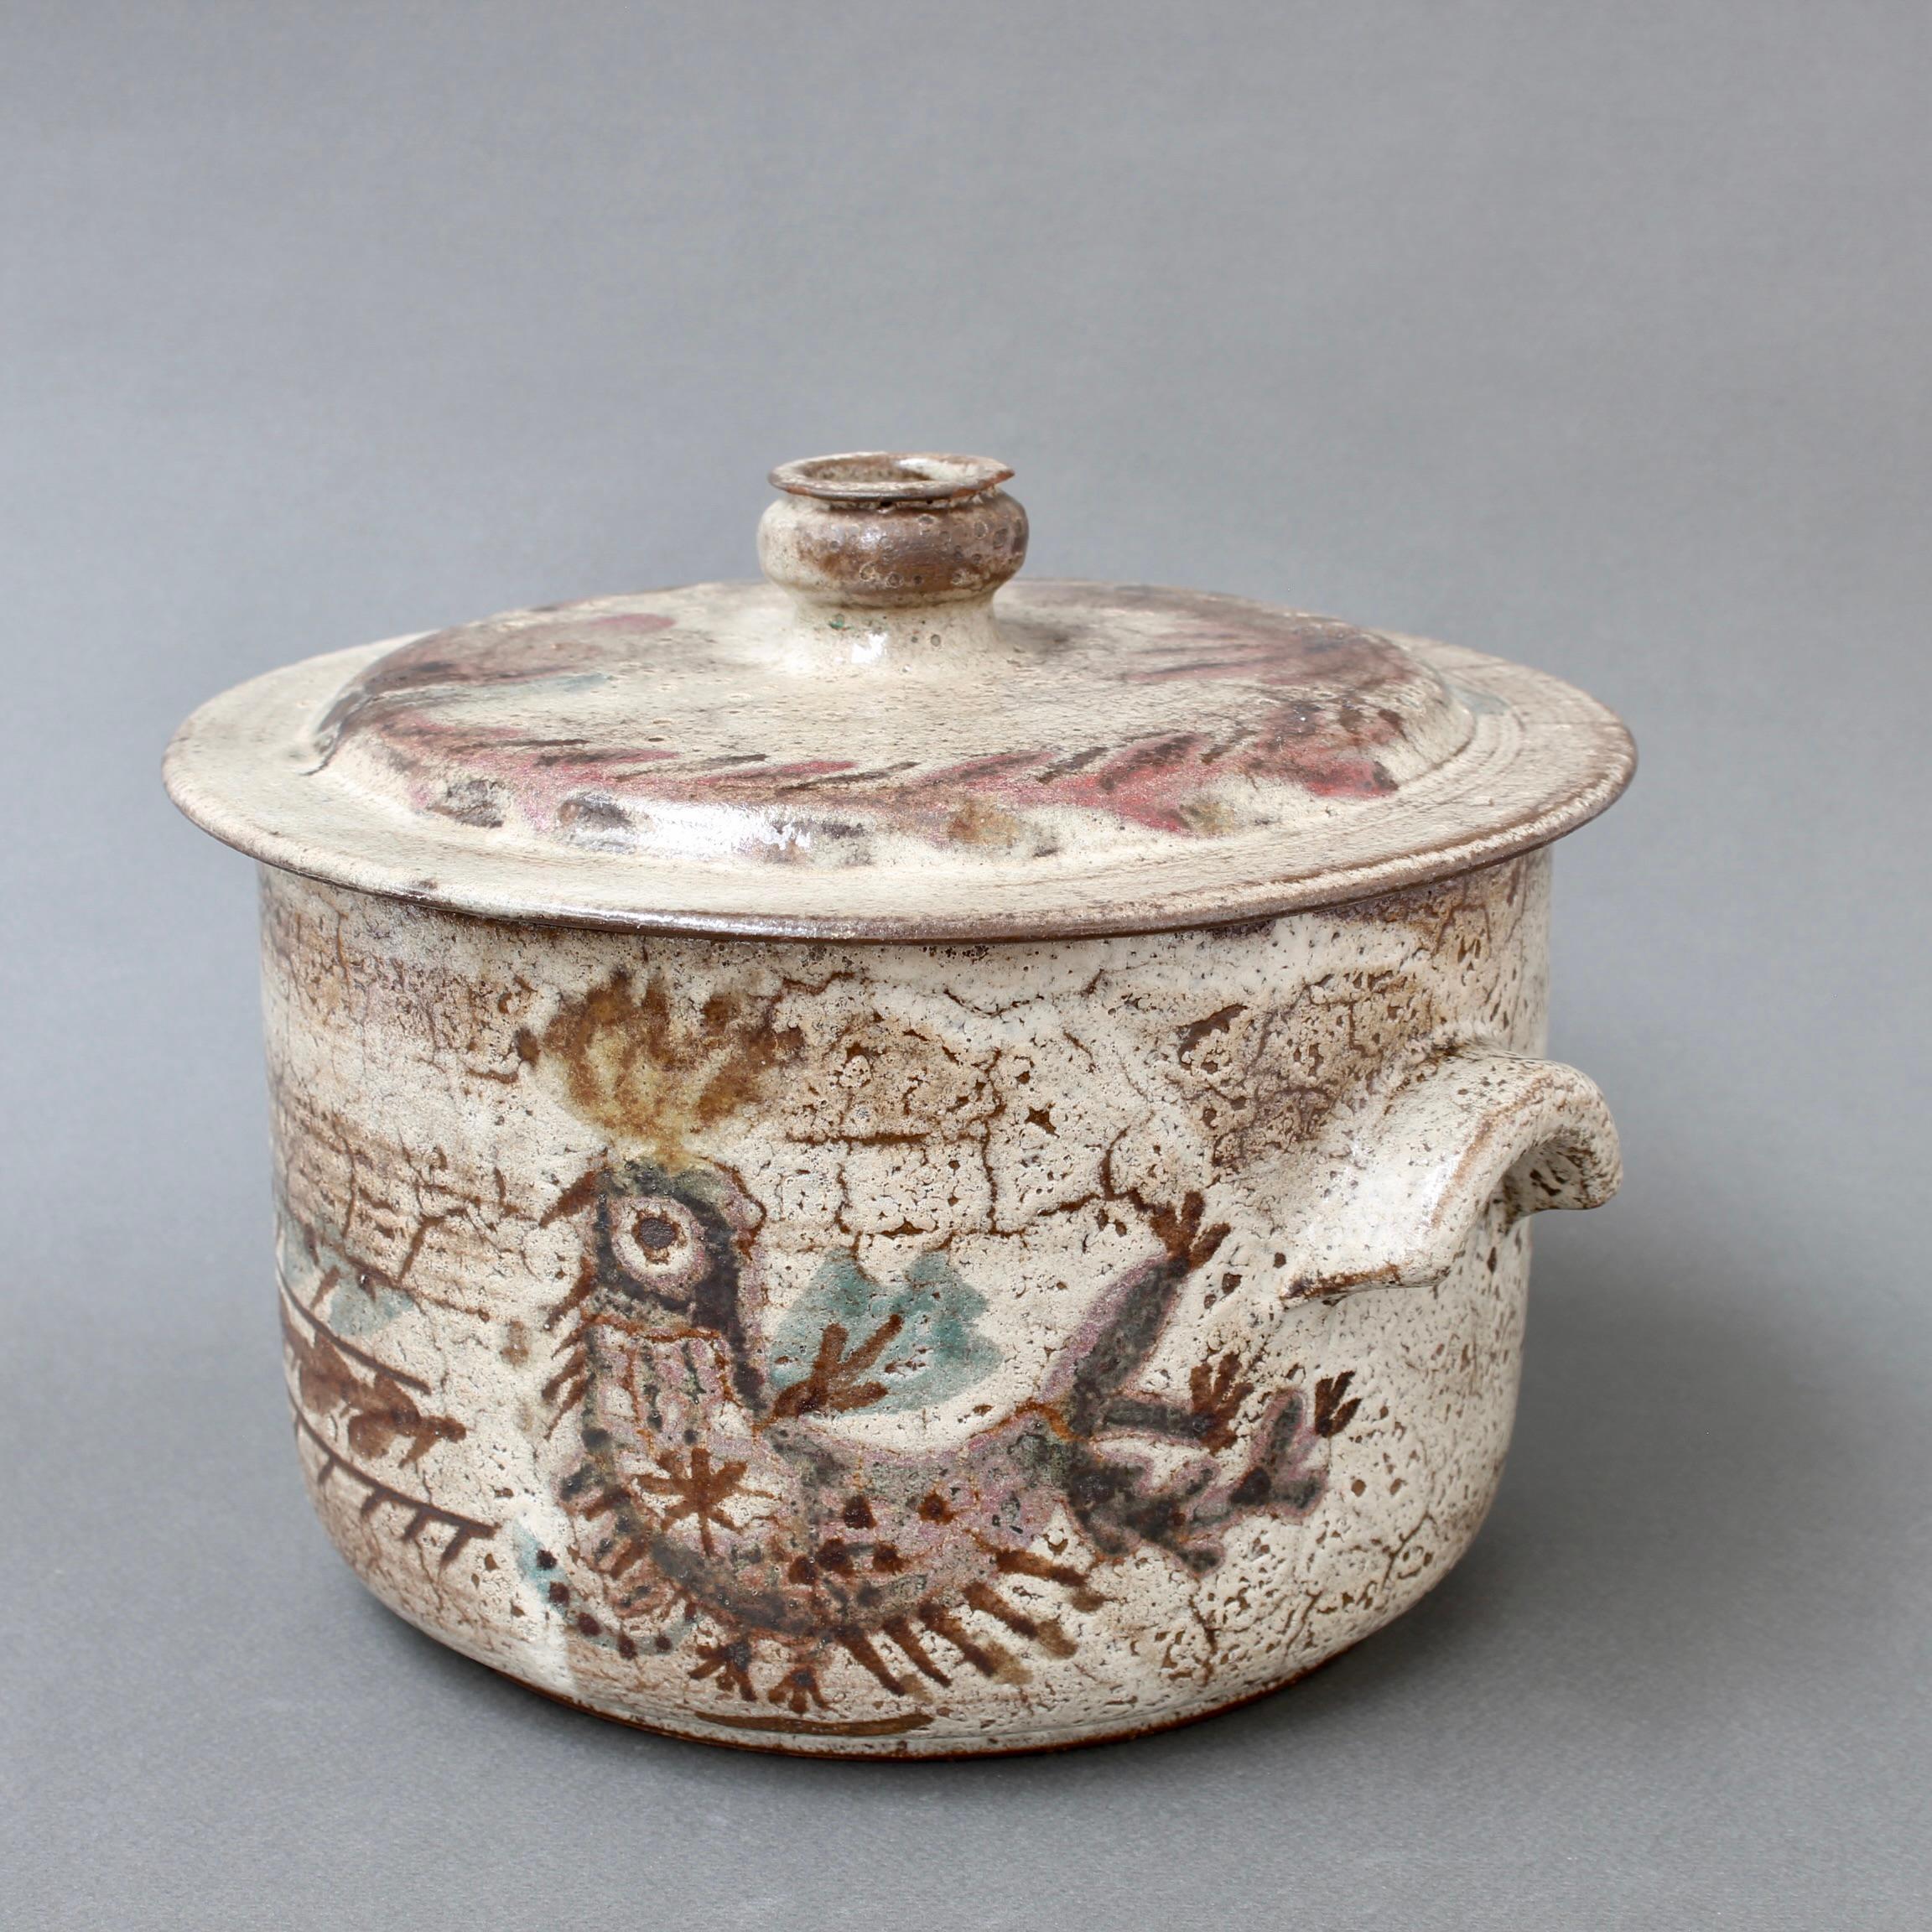 Decorative vintage ceramic casserole with lid by Gustave Reynaud, Le Mûrier (circa 1950s). On the rustic exterior is a characteristically French rooster in a light mulberry colour with blue-green highlights. Alongside is a series of leaves on a